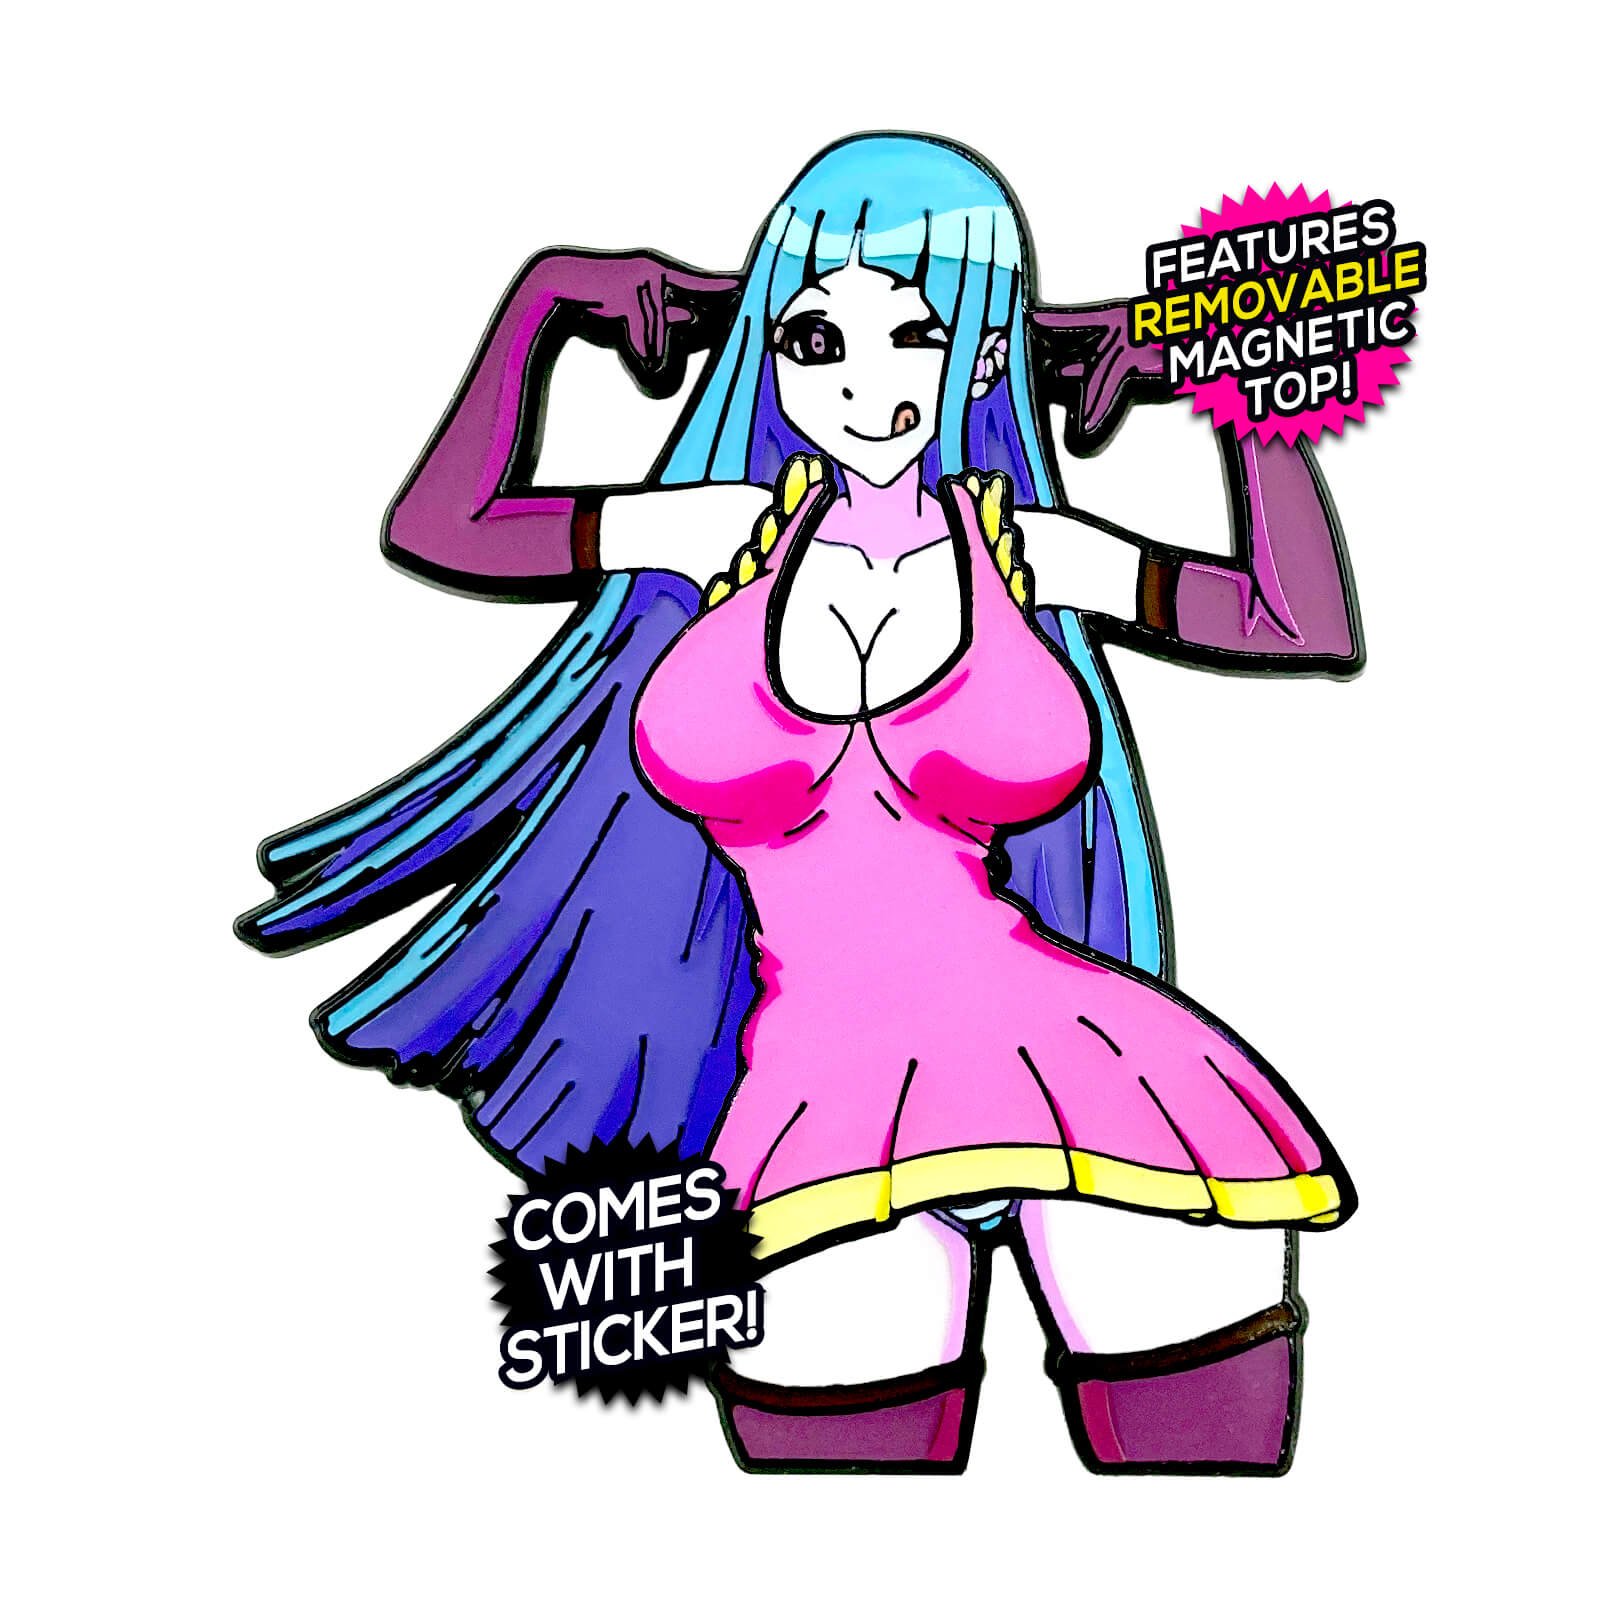 378_617557c6c57b3_meme-chan-after-hours-pin-and-sticker.jpg